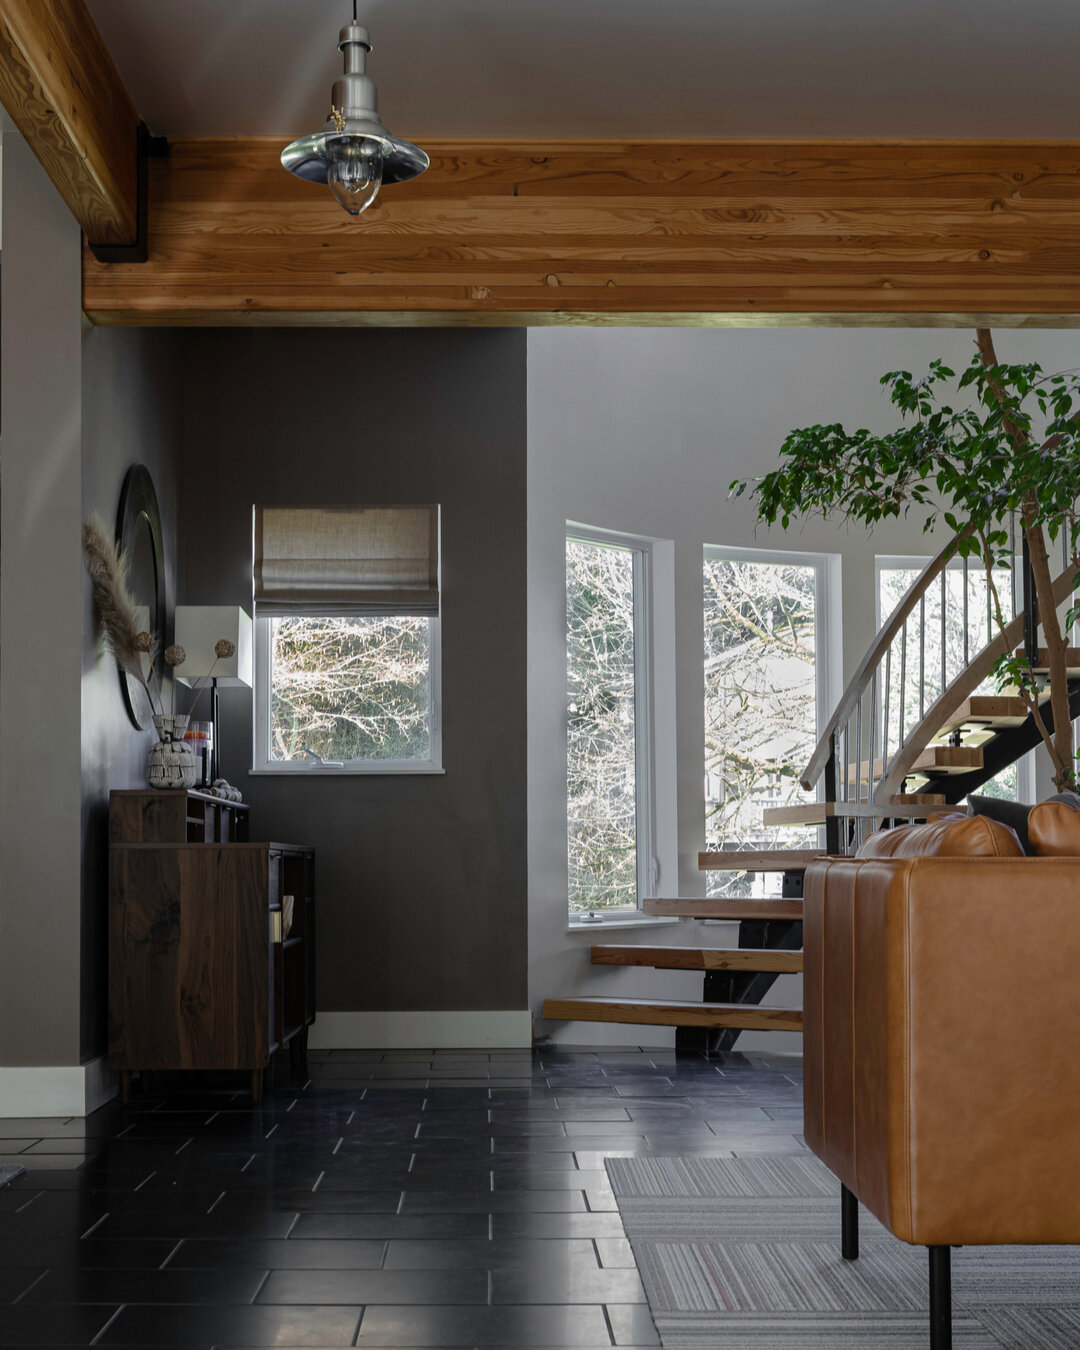 Open concept living. Floating stairs. Natural beams. Hand-honed basalt floors. Need I say more?​​​​​​​​​
Design: #HarpoleHomeProjects​​​​​​​​
Photo: @sumairaamberphoto​​​​​​​​
.​​​​​​​​
.​​​​​​​​
.​​​​​​​​
.​​​​​​​​
.​​​​​​​​
#interiordesigngoals #in